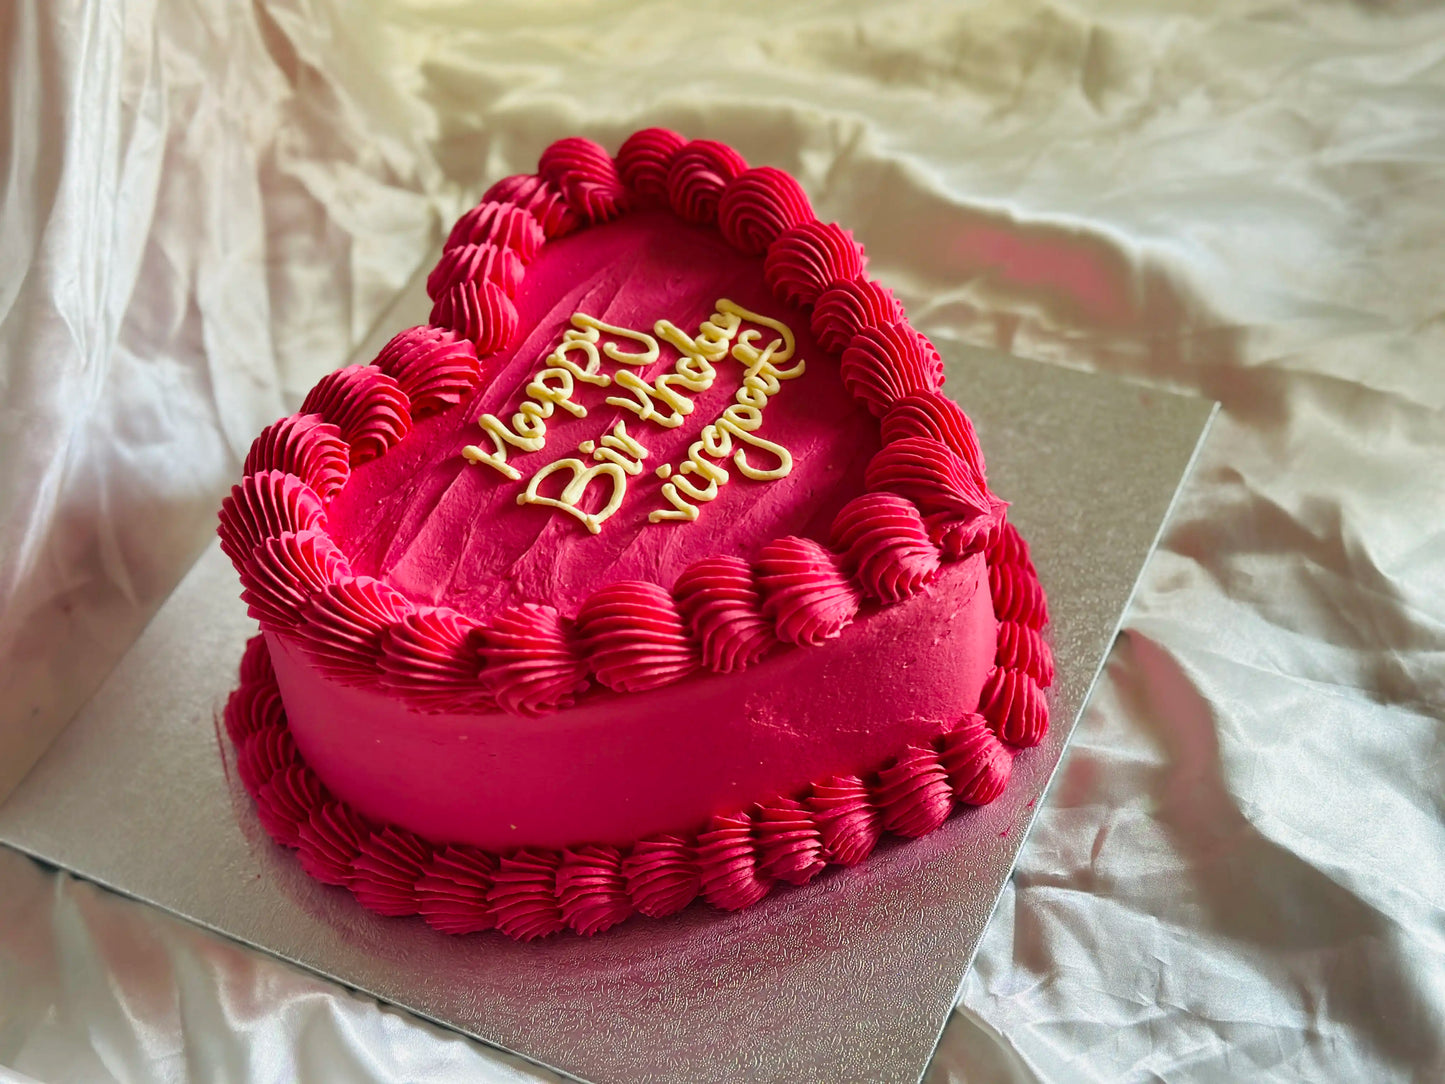 Elegant heart cake adorned with red velvet and cream cheese icing, a favourite in Romford - CakeTrays.co.uk.